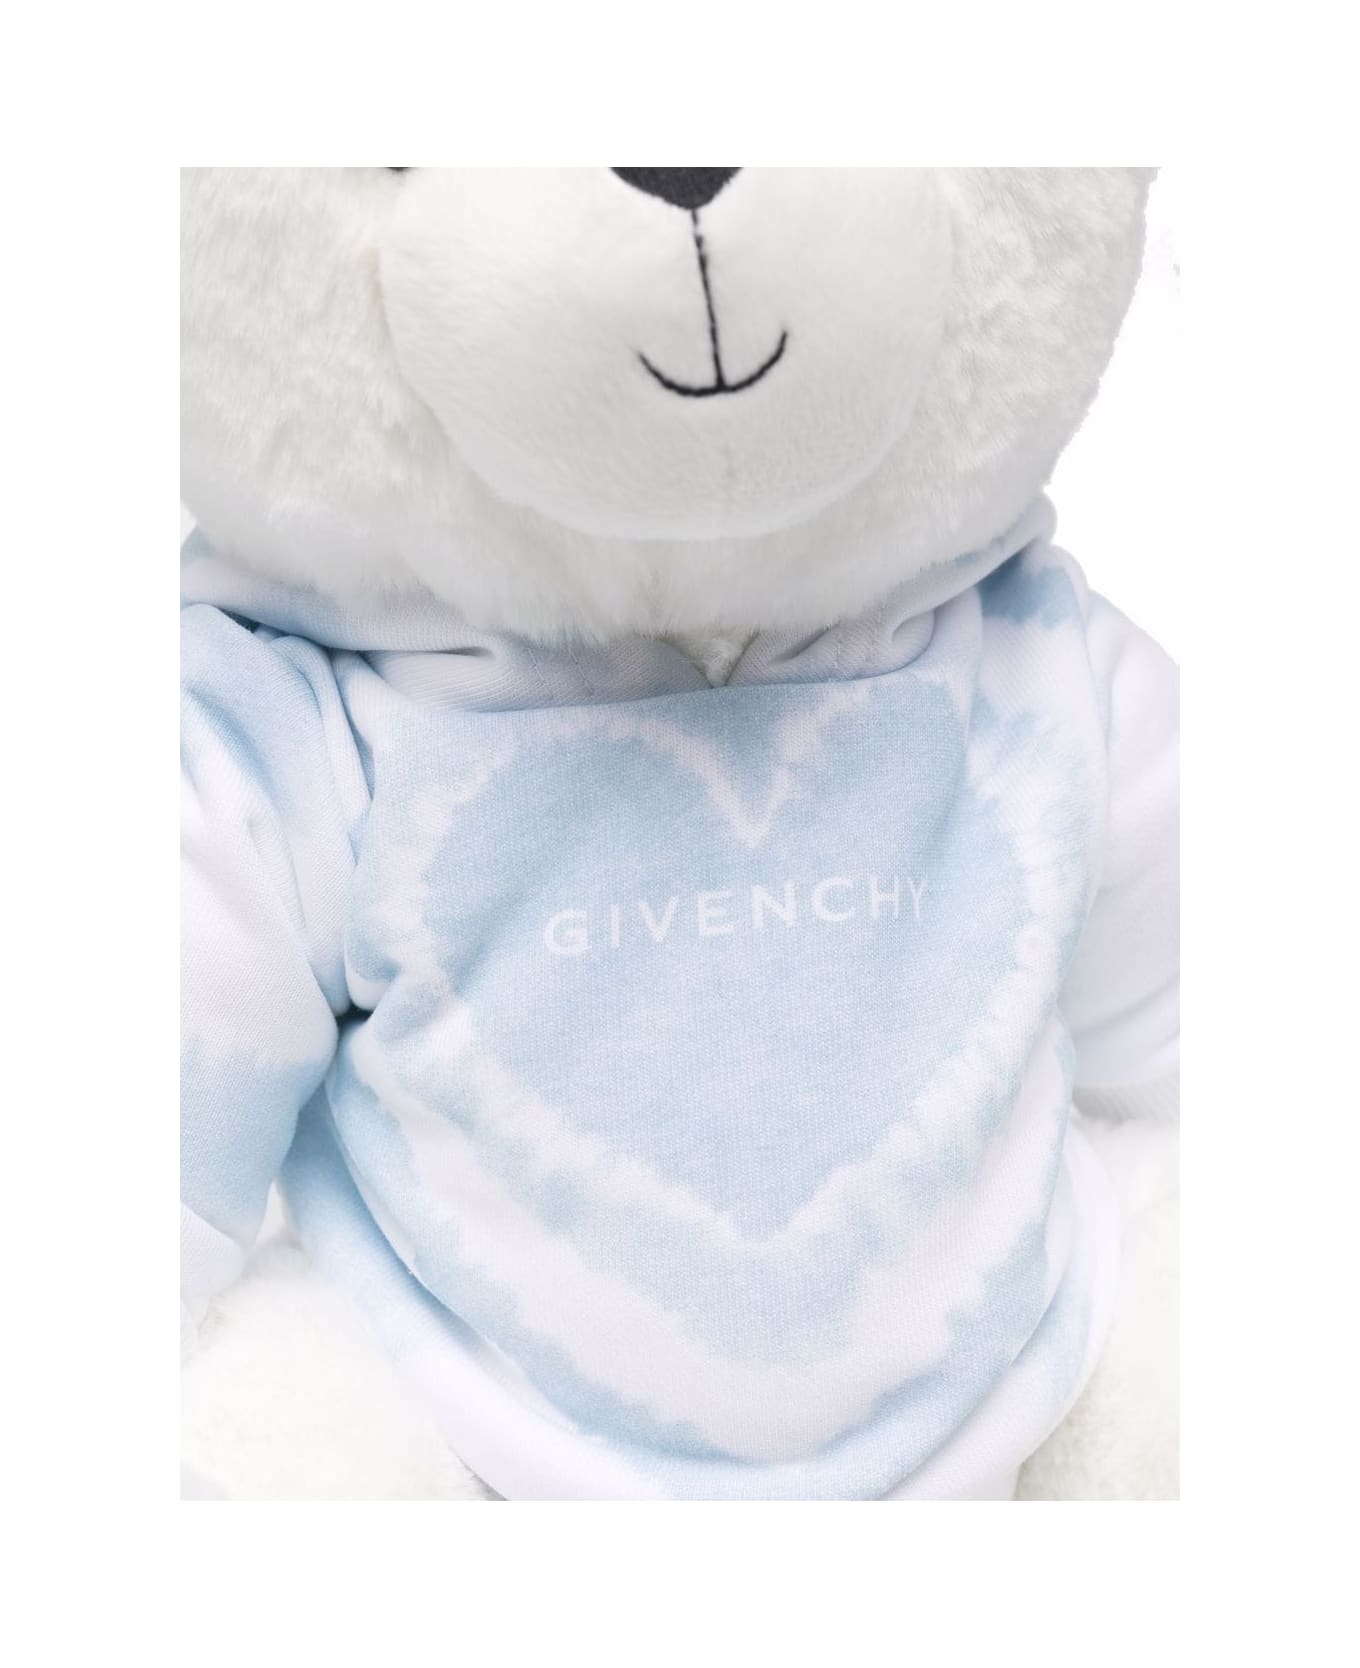 Givenchy Light Blue And White Givenchy Teddy Bear Plush - Blue